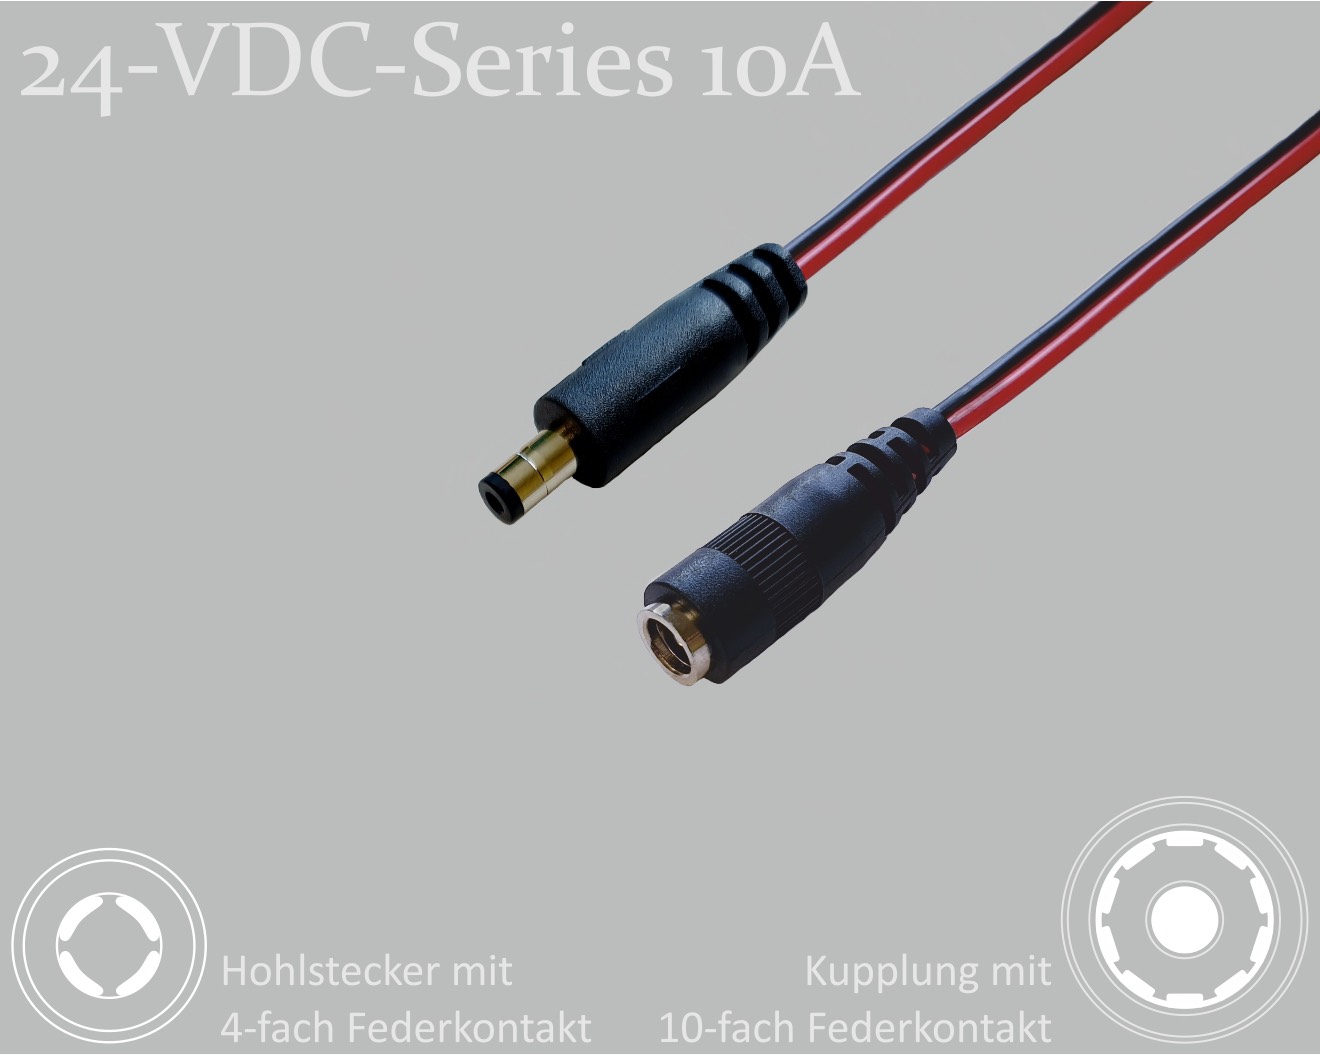 24-VDC-Series 10A, DC extension cable, DC male with 4-spring contact 2.1x5.5x9.5mm to DC female with 10-spring contact 2.1x5.5mm, flat cable 2x0.75mm², red/black, 2m